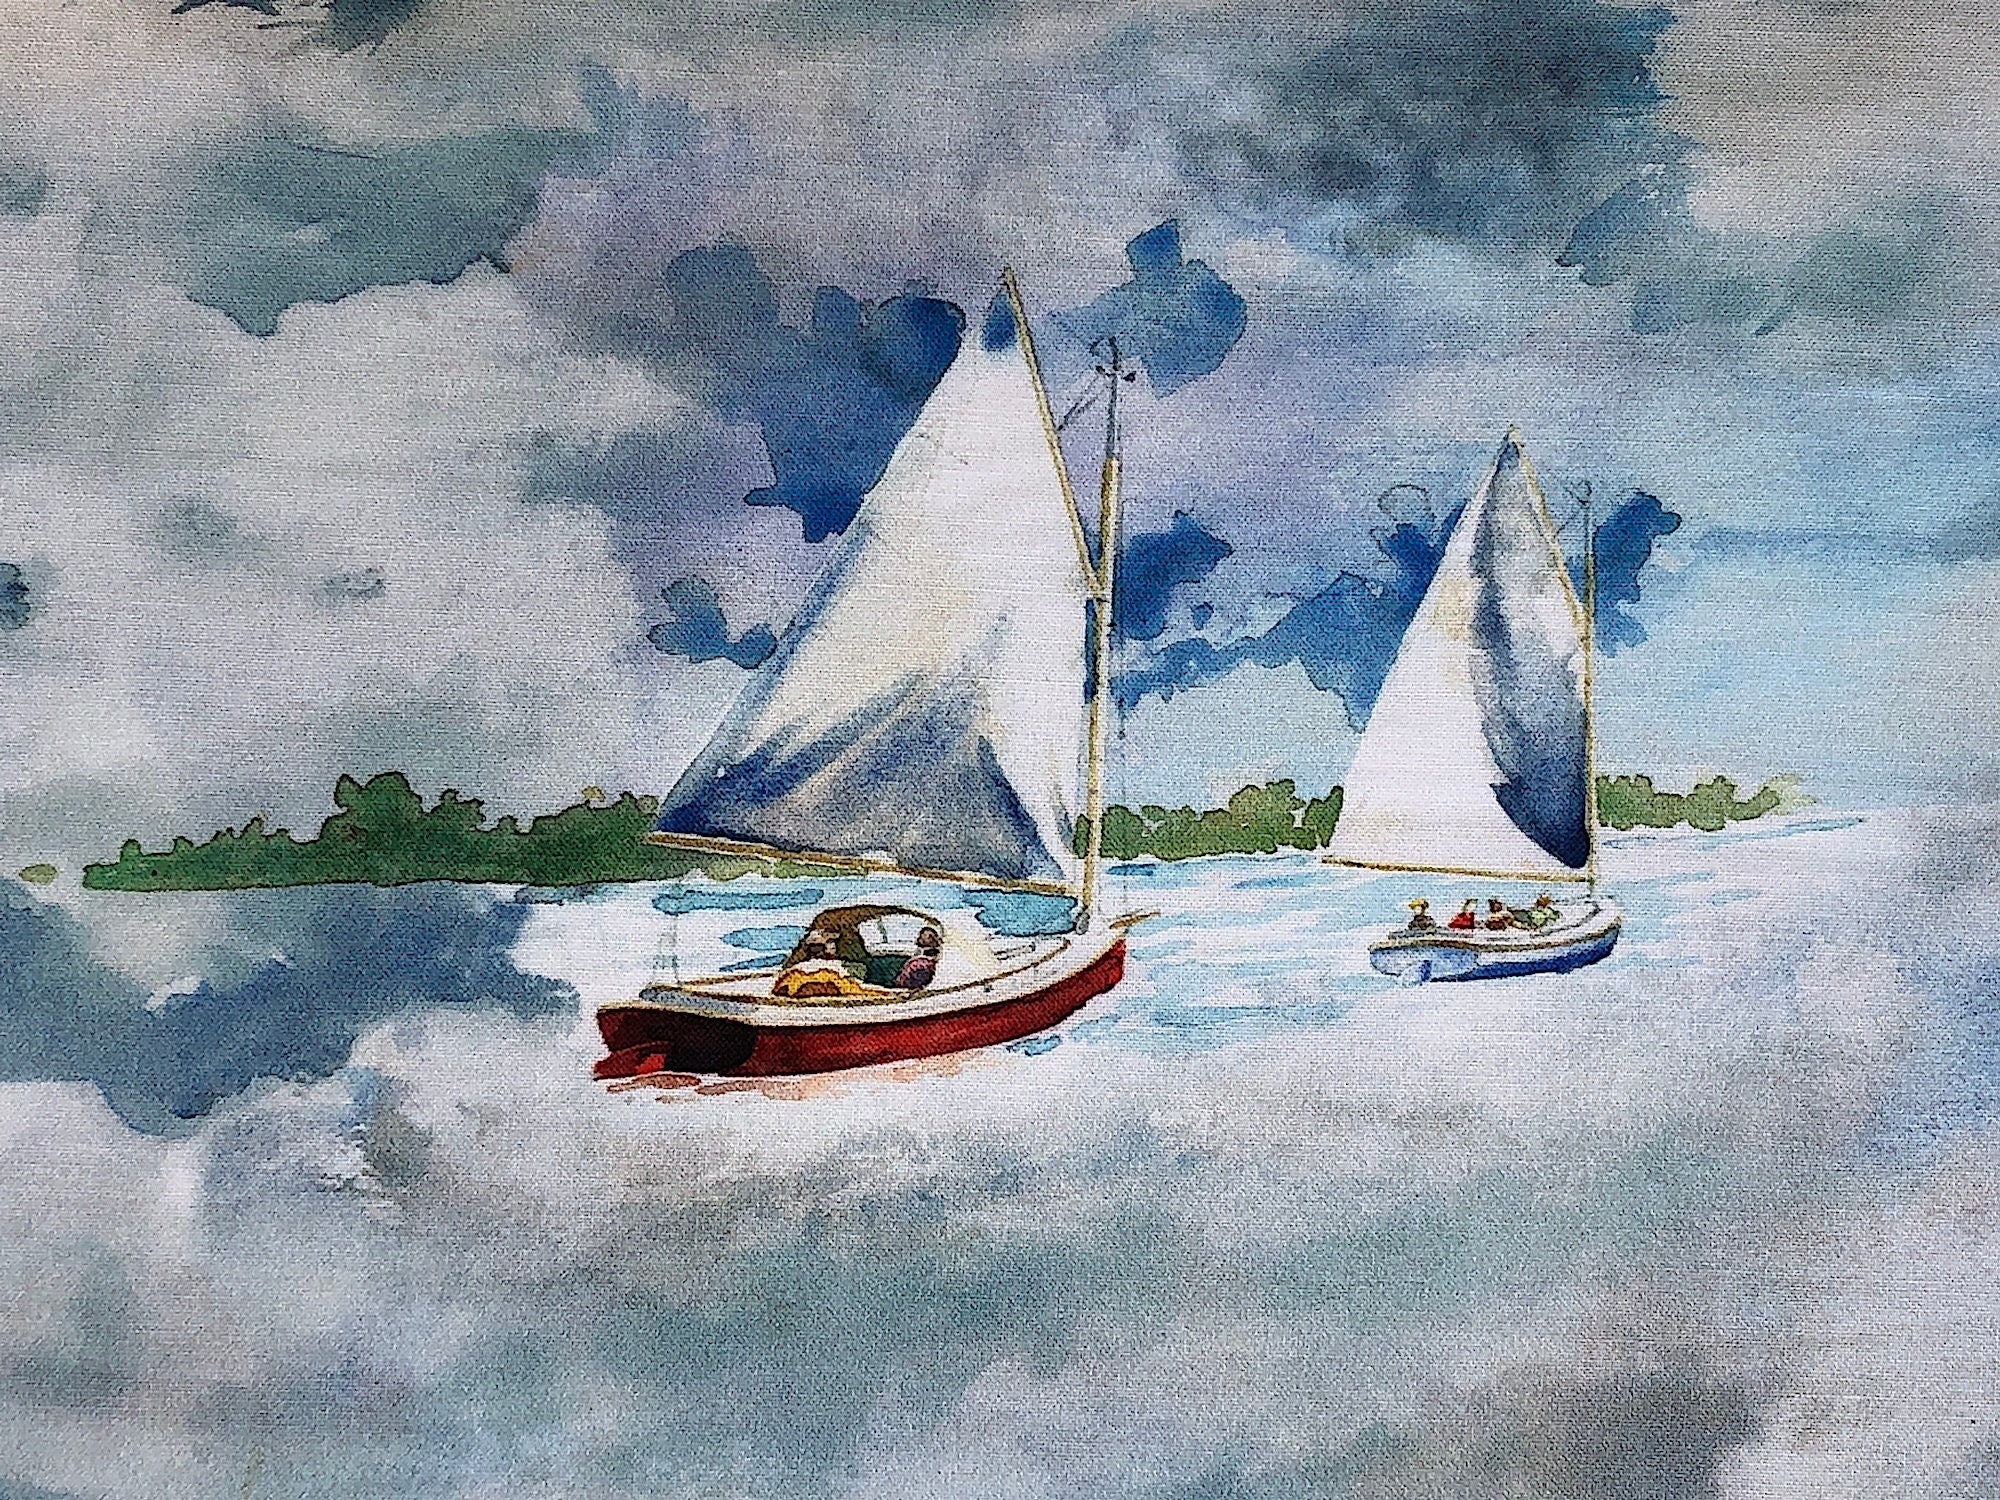 Close up of two sailboats in the water.